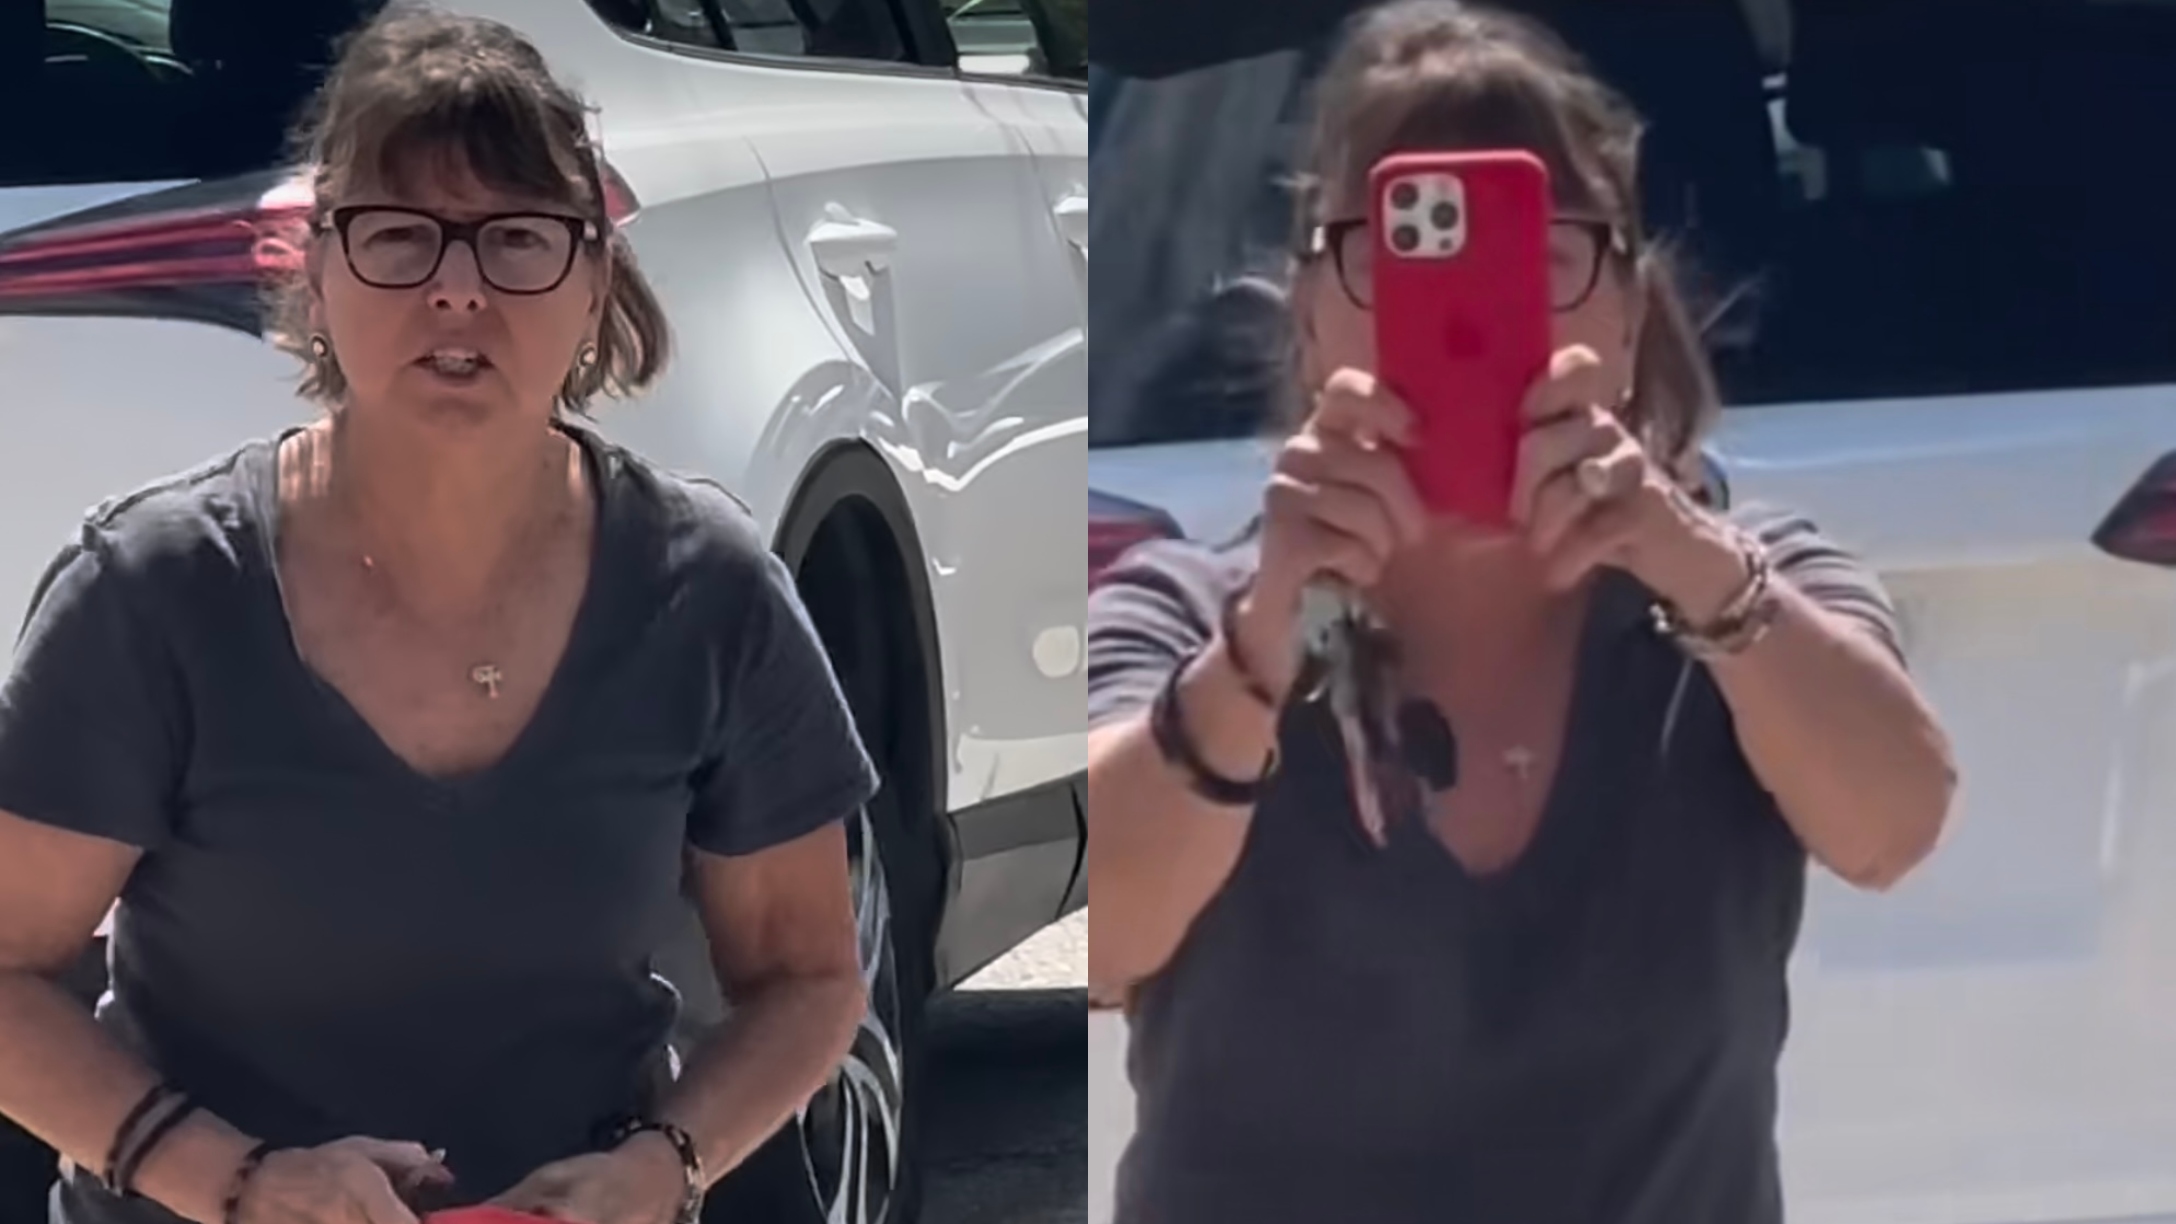 You've Ruined My Life': Woman's Bizarre Racist Rant Goes Viral